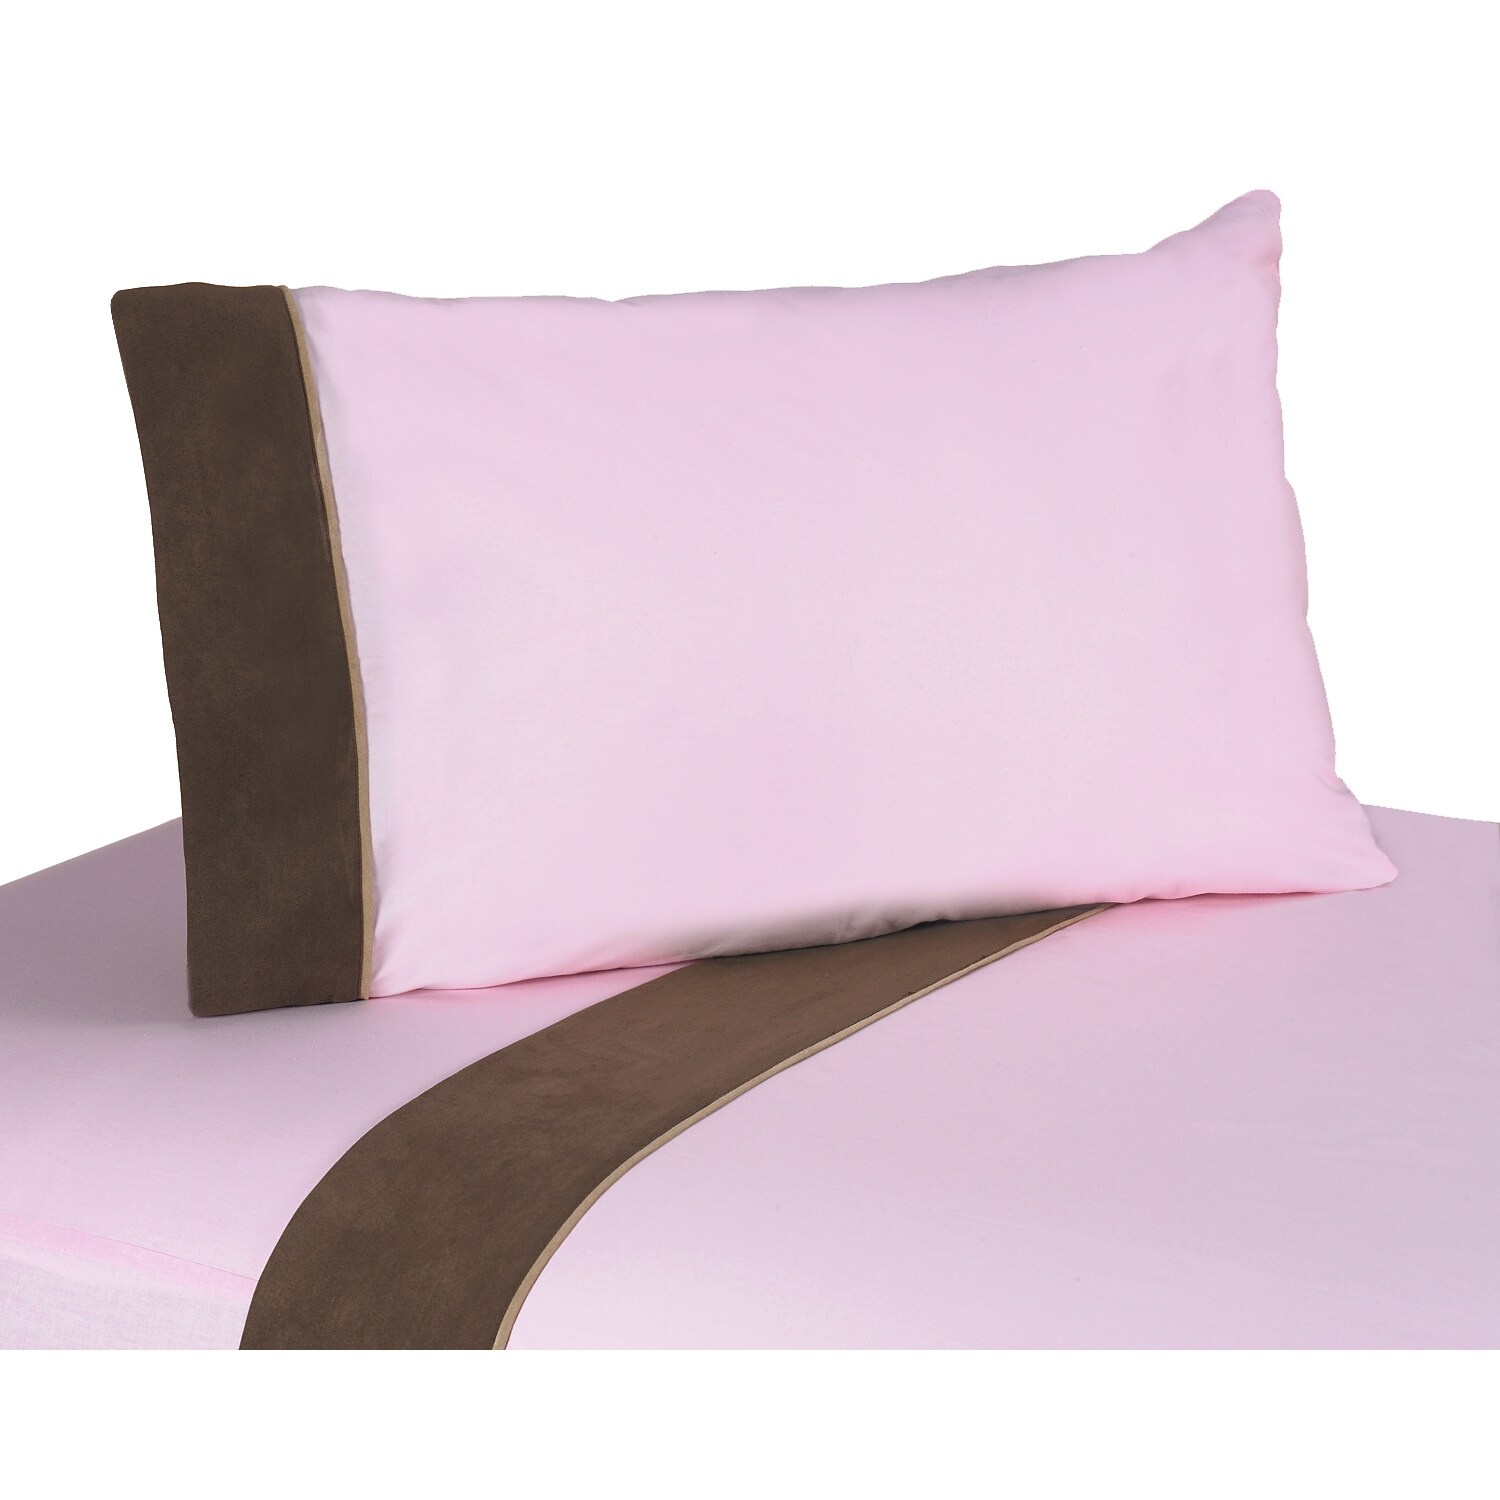 Sweet Jojo Designs Soho Pink Bedding Collection Sheet Set (Pink Materials 100 percent cotton fabricsChocolate microsuede trim and camel pipingCare instructions Machine washableTwin DimensionsFitted sheet 39 inches wide x 75 inches longFlat sheet 66 in